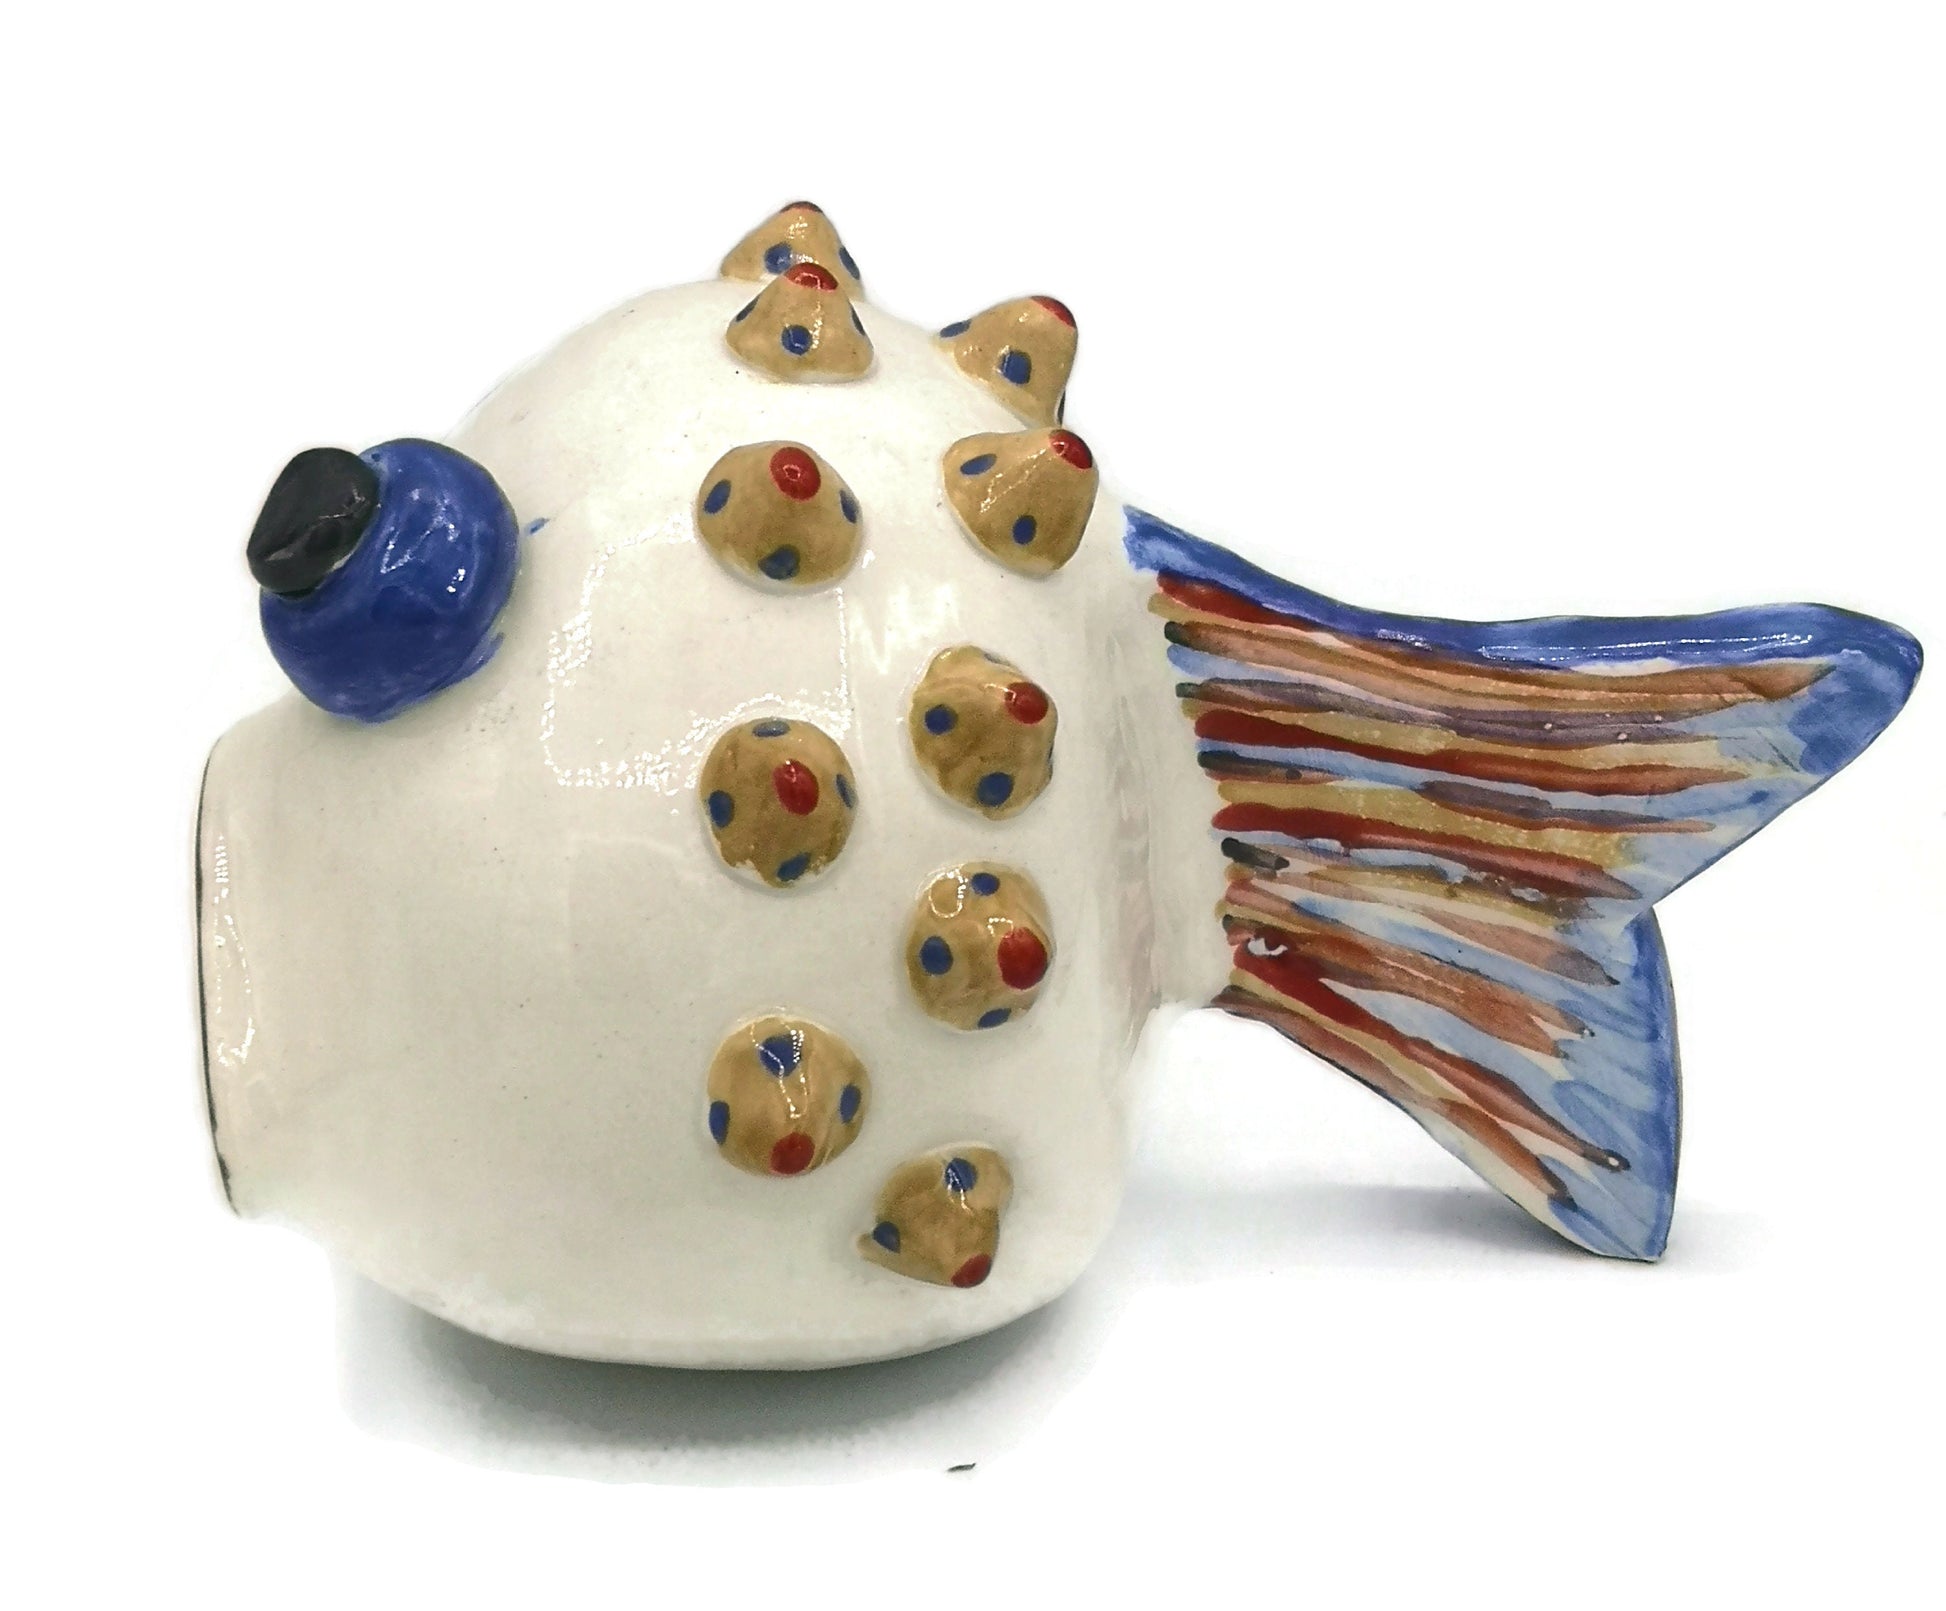 Handmade Ceramic Fish Sculpture Hand Painted, Coastal Pottery Animal Office Desk Accessories Best Gifts For Him, Best Sellers - Ceramica Ana Rafael